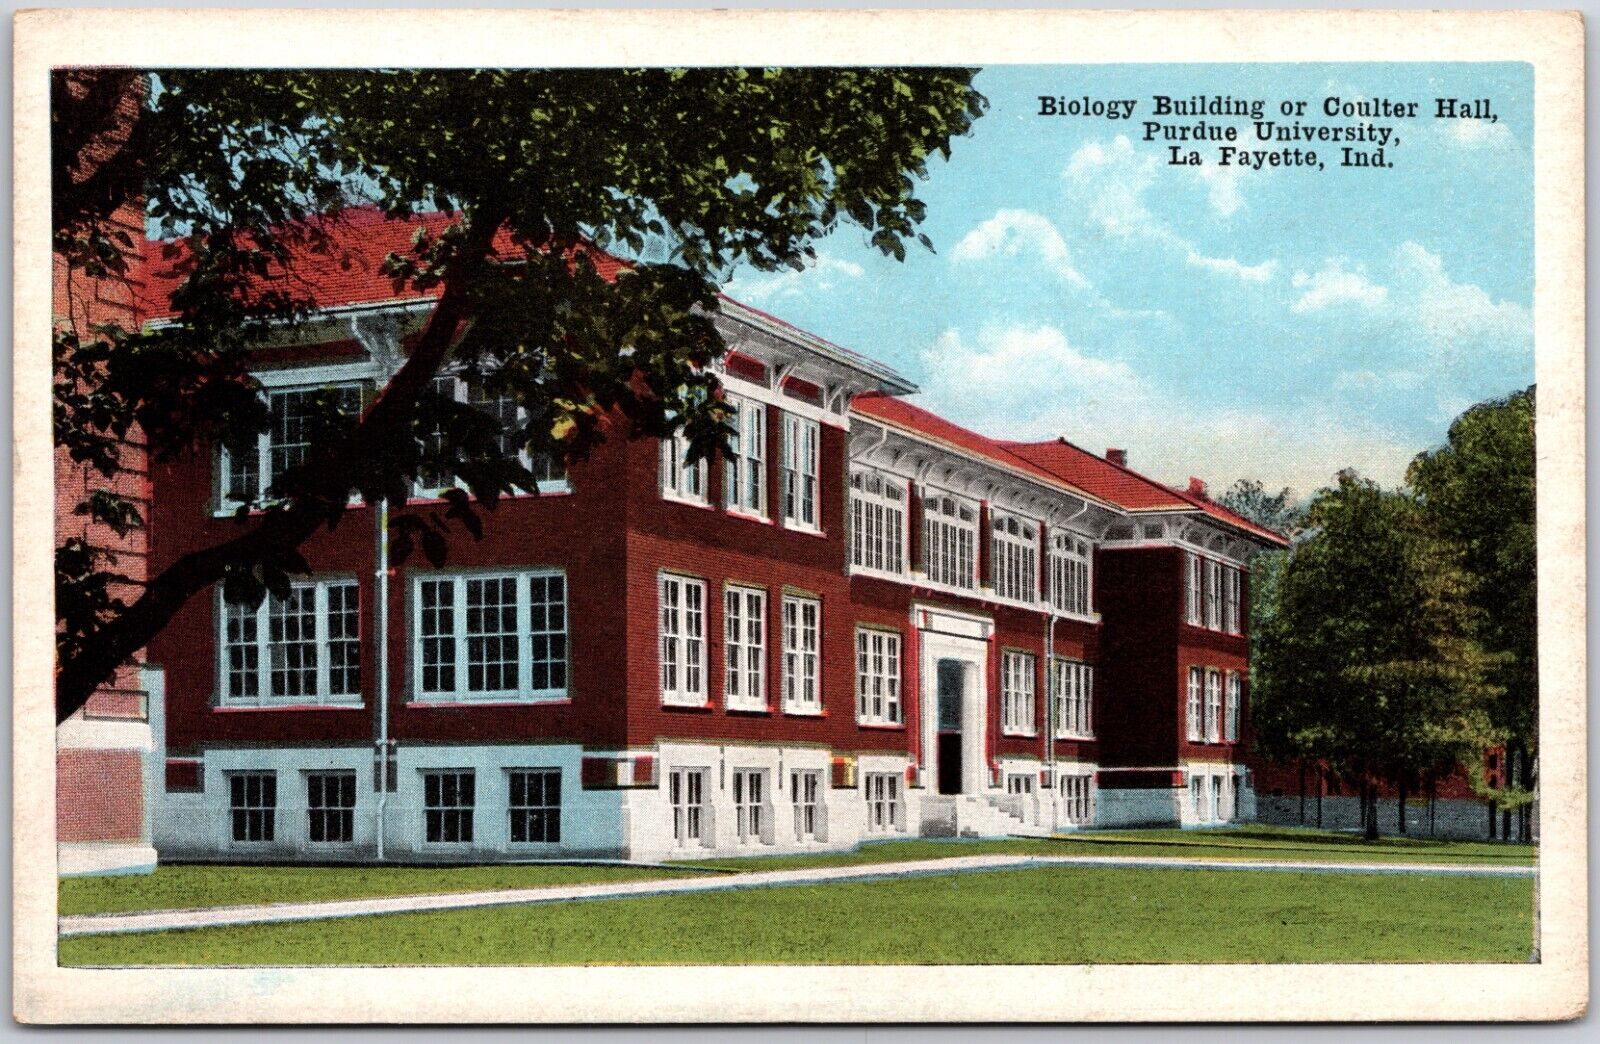  Biology Building Coulter Hall Purdue University Lafayette In Indiana Postcard